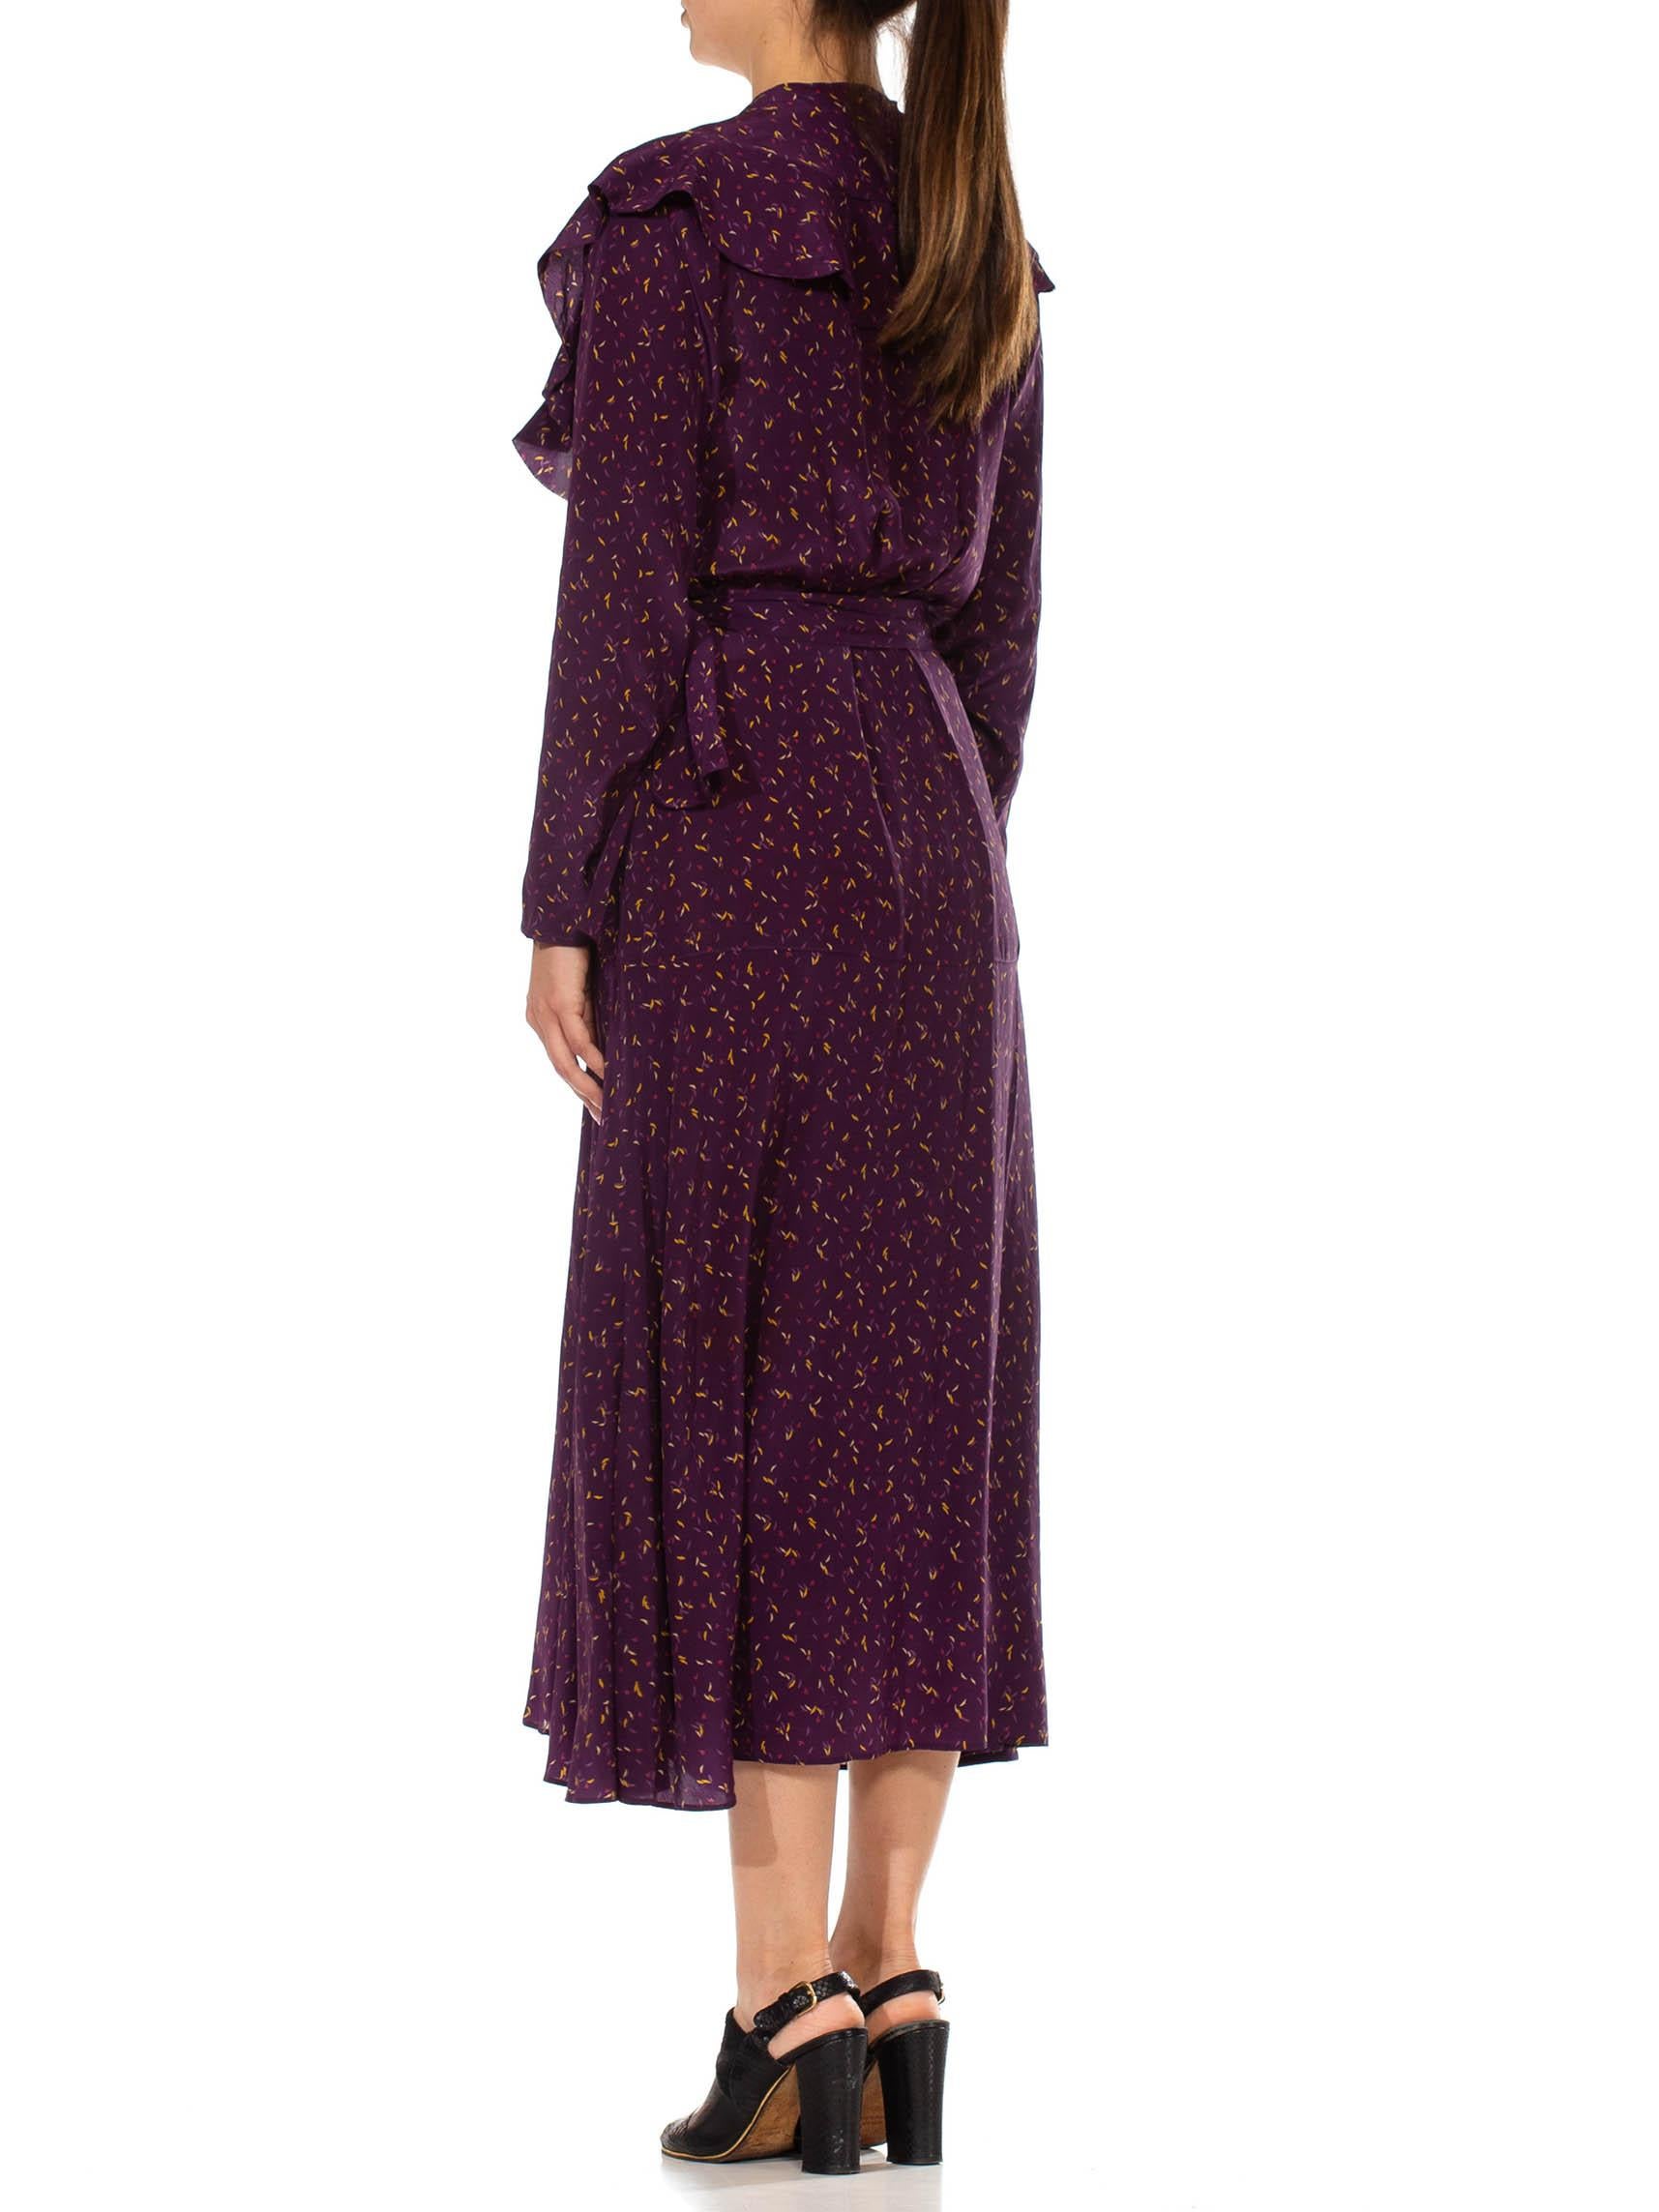 1930'S Eggplant Purple Silk Crepe De Chine Victorian Style Long Sleeve Dress Wi In Excellent Condition For Sale In New York, NY